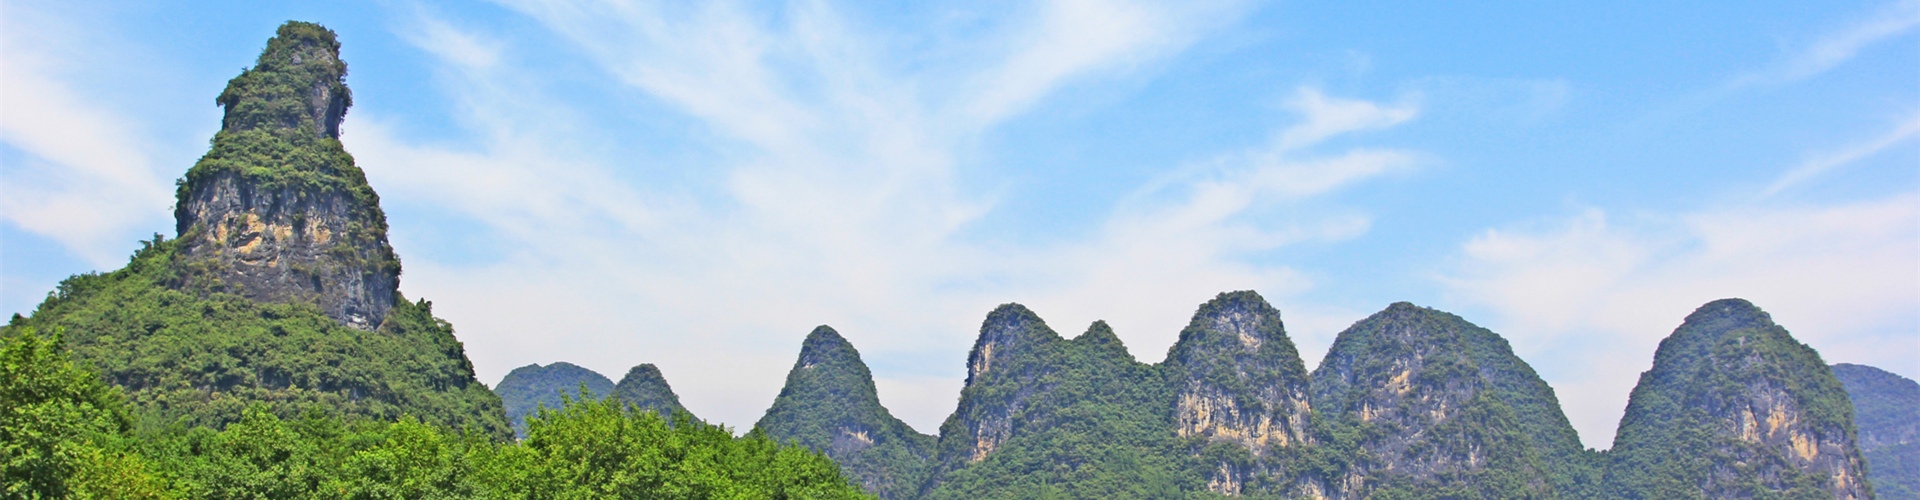 Guilin Mountains - the Top Beautiful Hills in Guilin with Elegant Shape